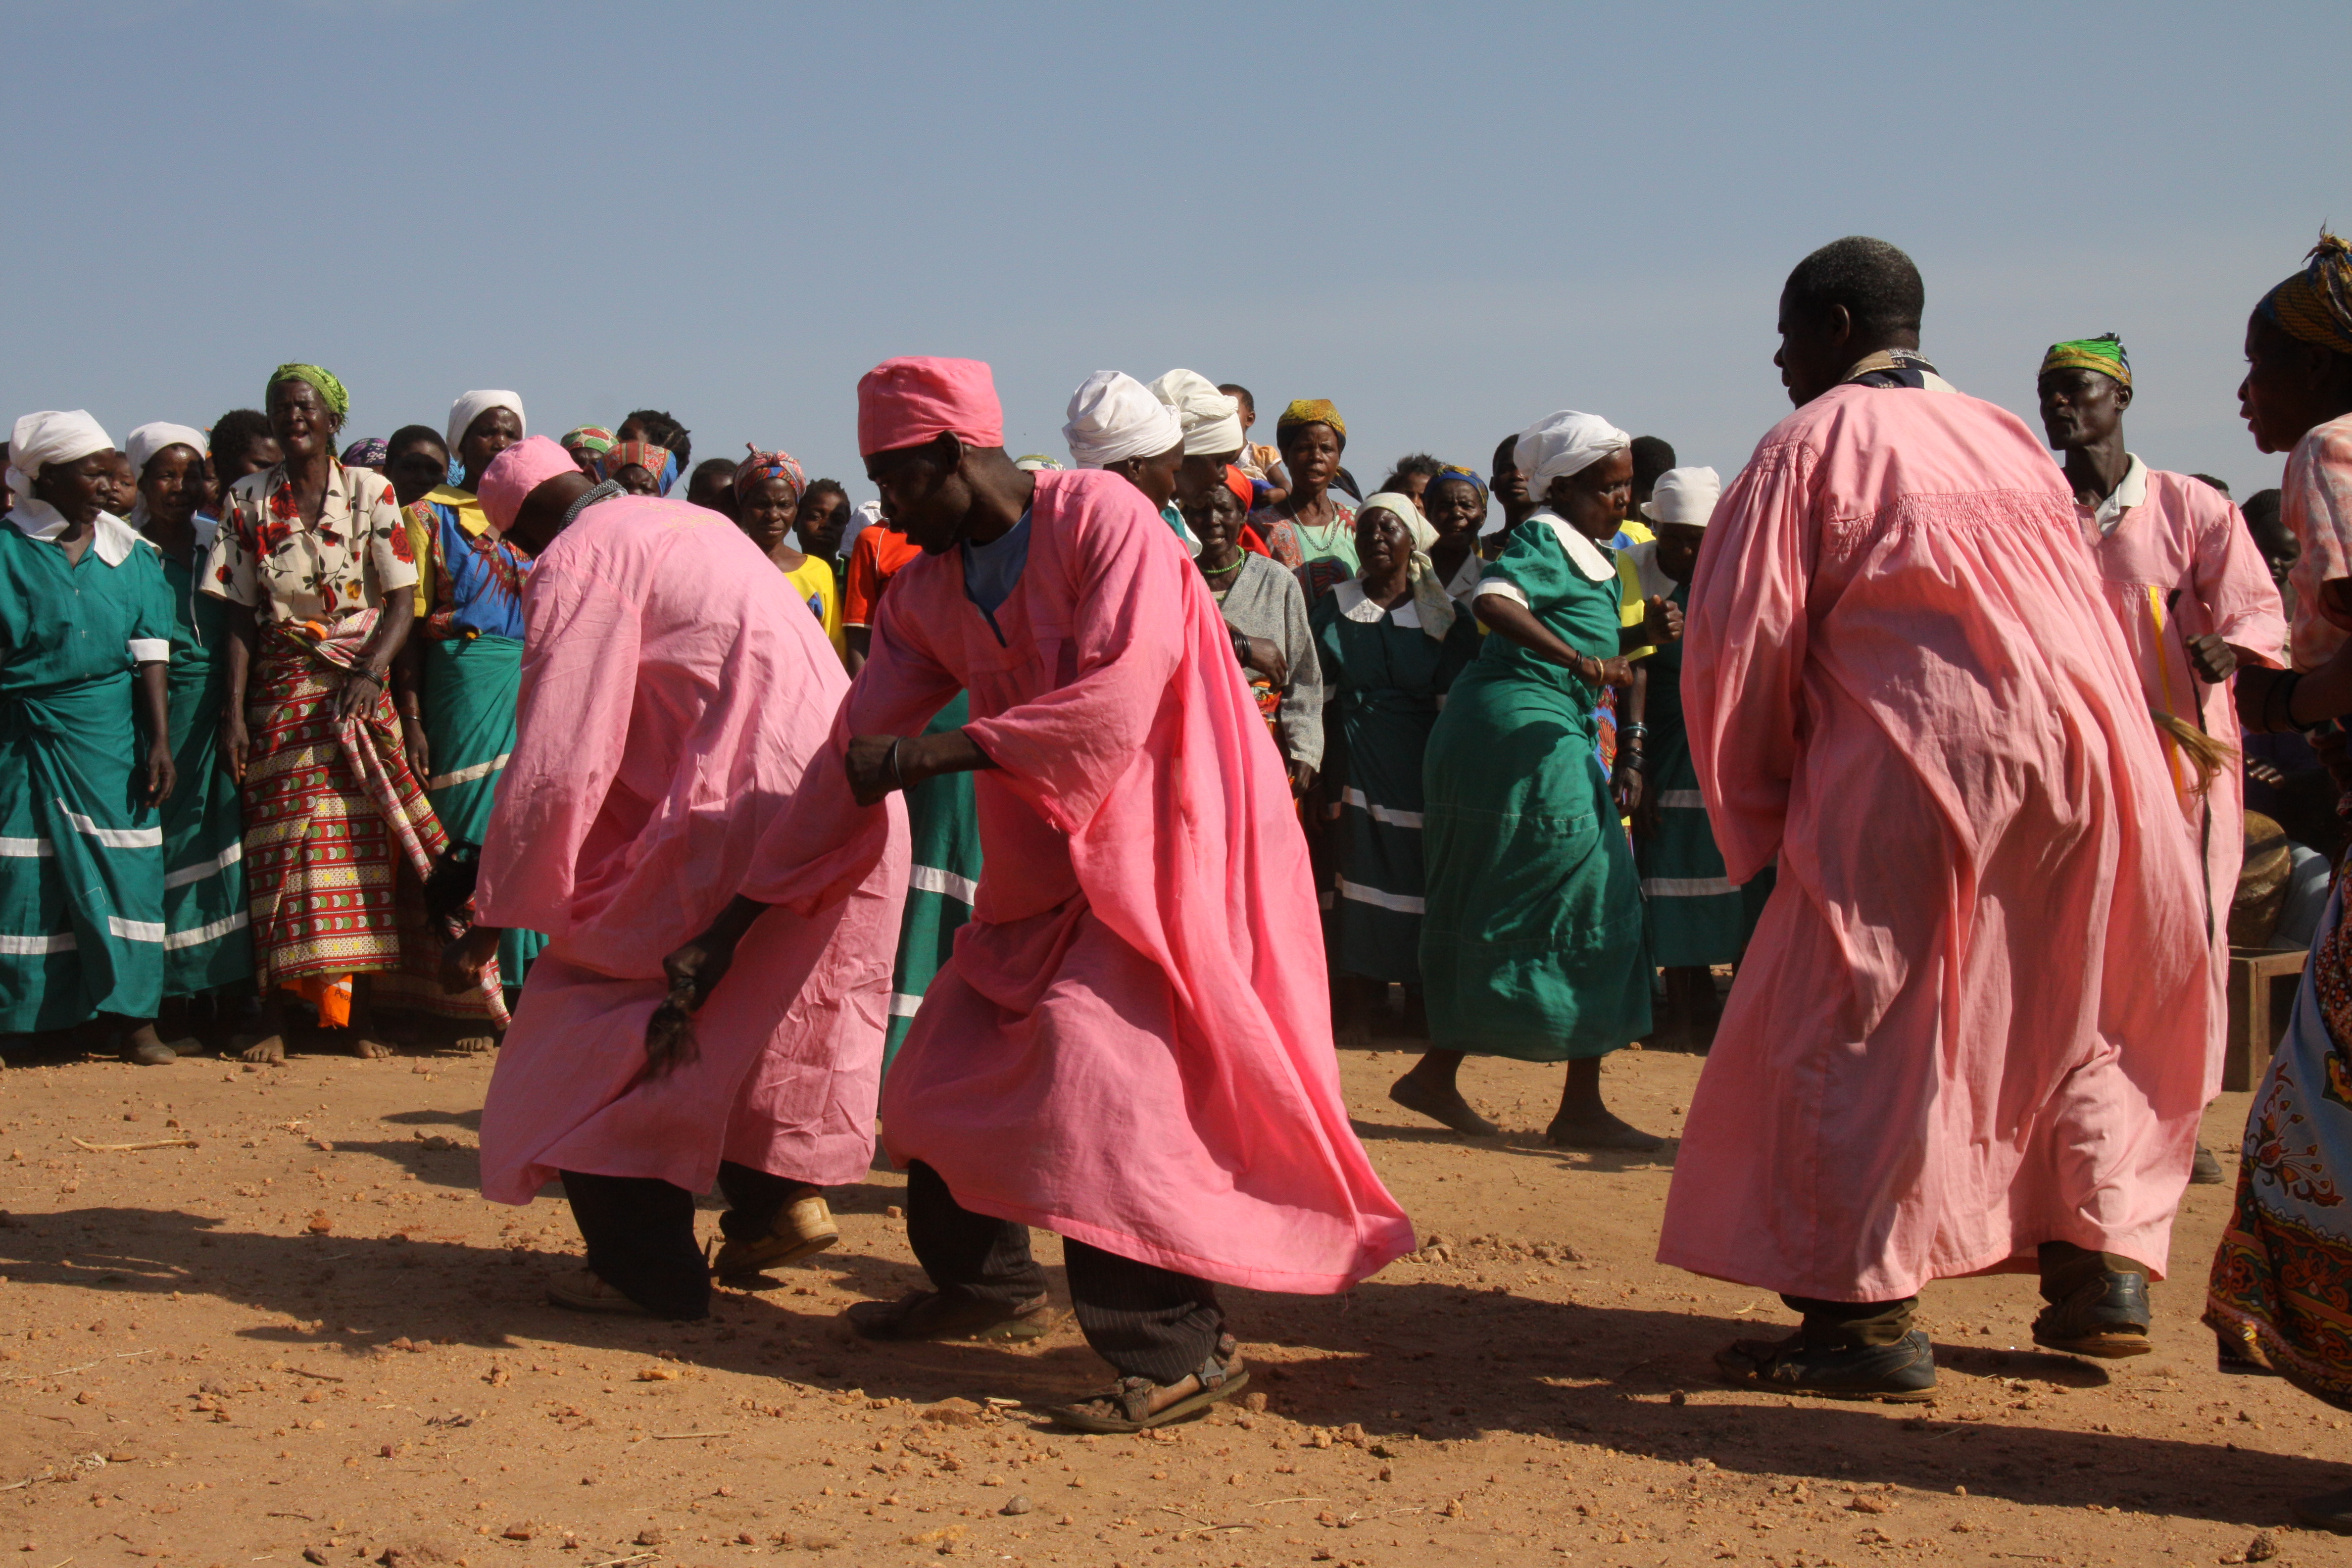 In Tsabango (Nanjiri Area) performers wear pink robes, surrounded by their fellow villagers. Photograph by Ingrid Ytre-Arne.